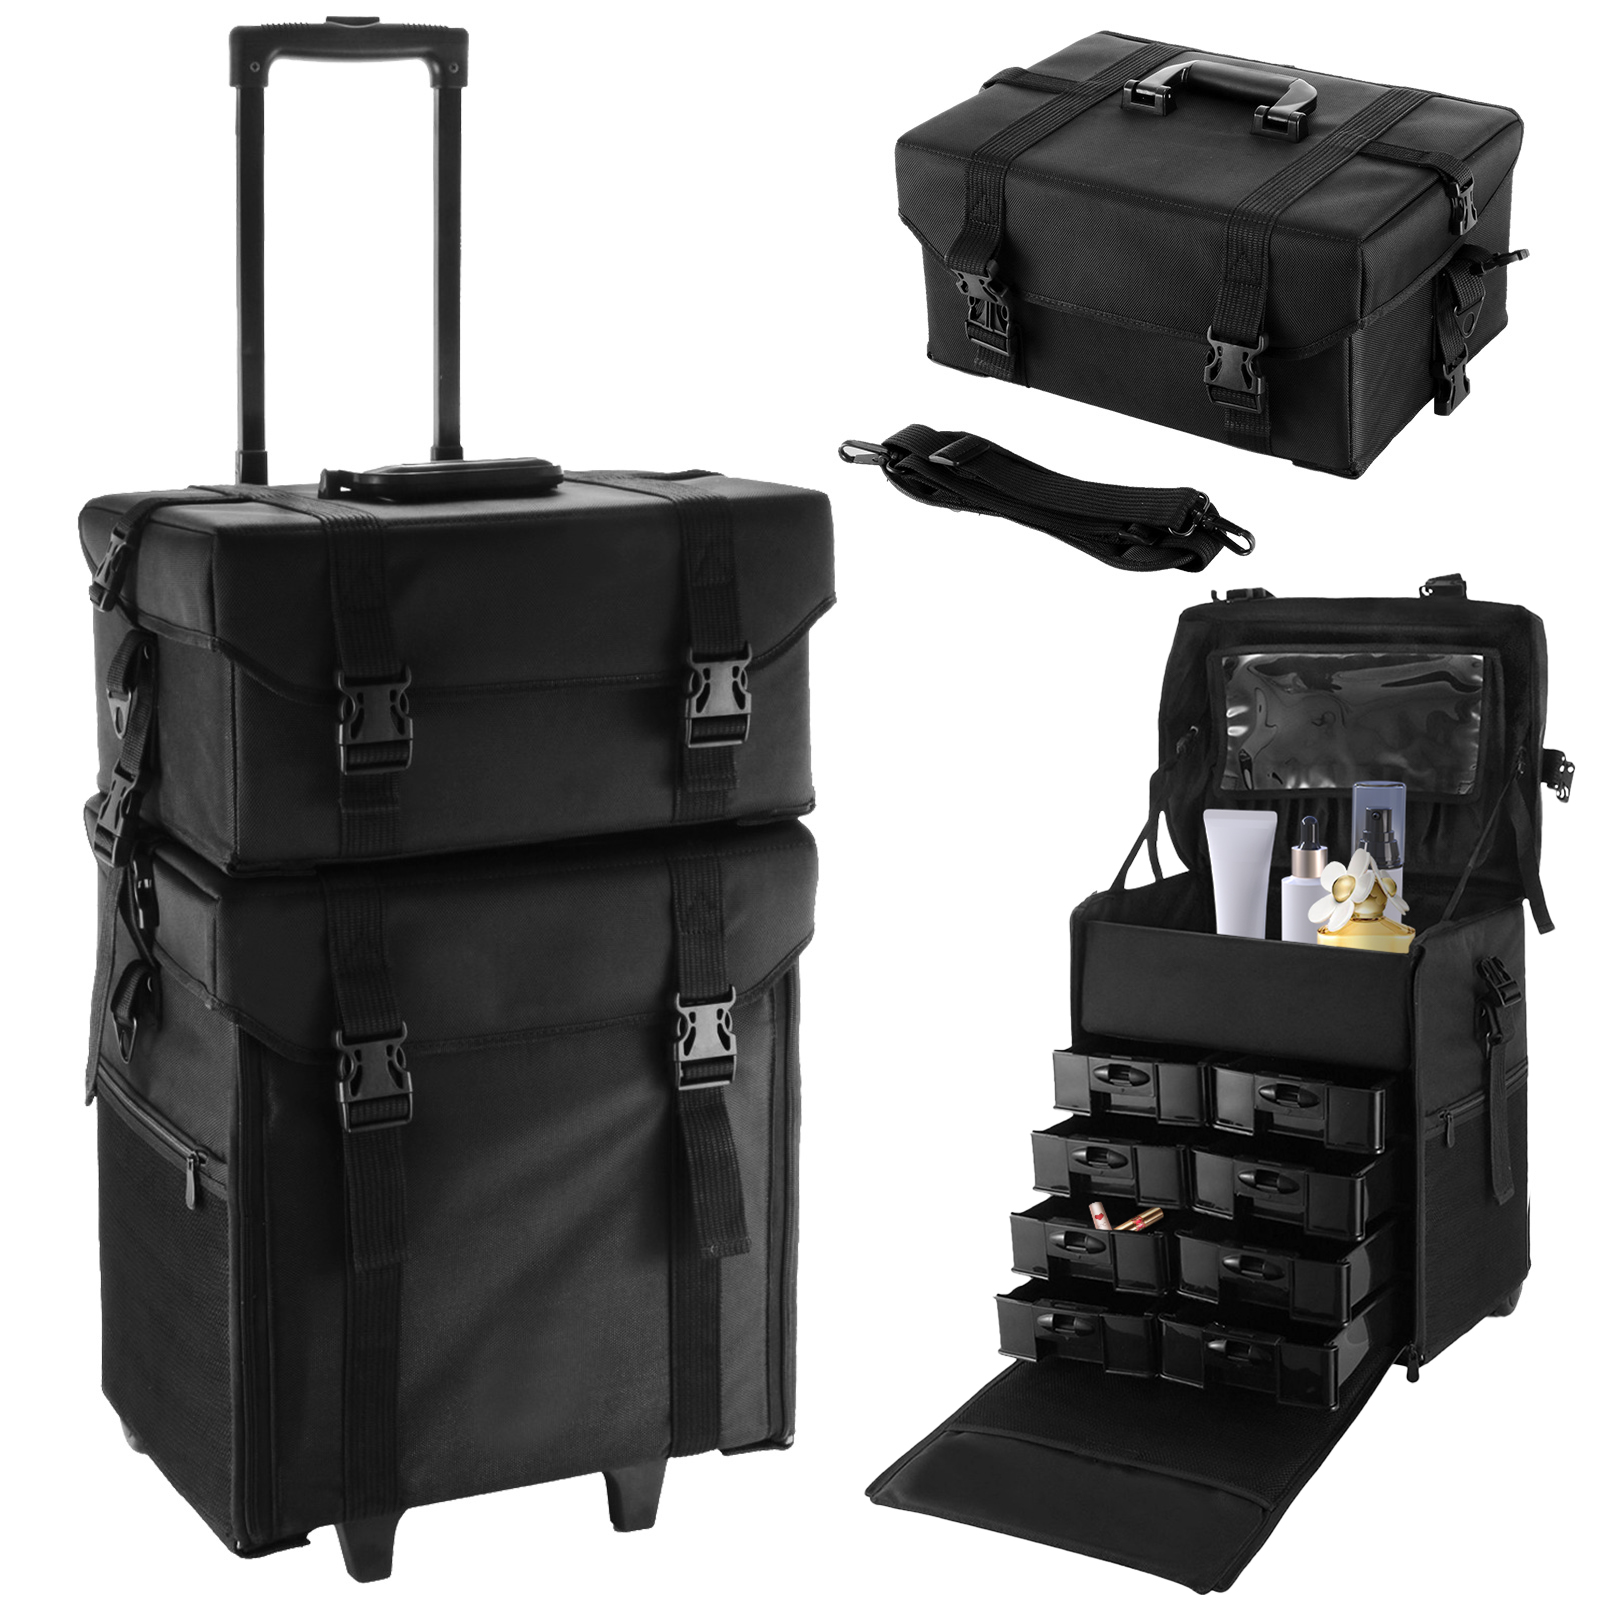 VEVOR 2 in 1 Nylon Rolling Makeup Case with Wheels Travel Cosmetic Cases Detachable Professional Rolling Trolley Makeup Travel Case Oxford Vanity Portable Makeup Artist Organizer Box | US